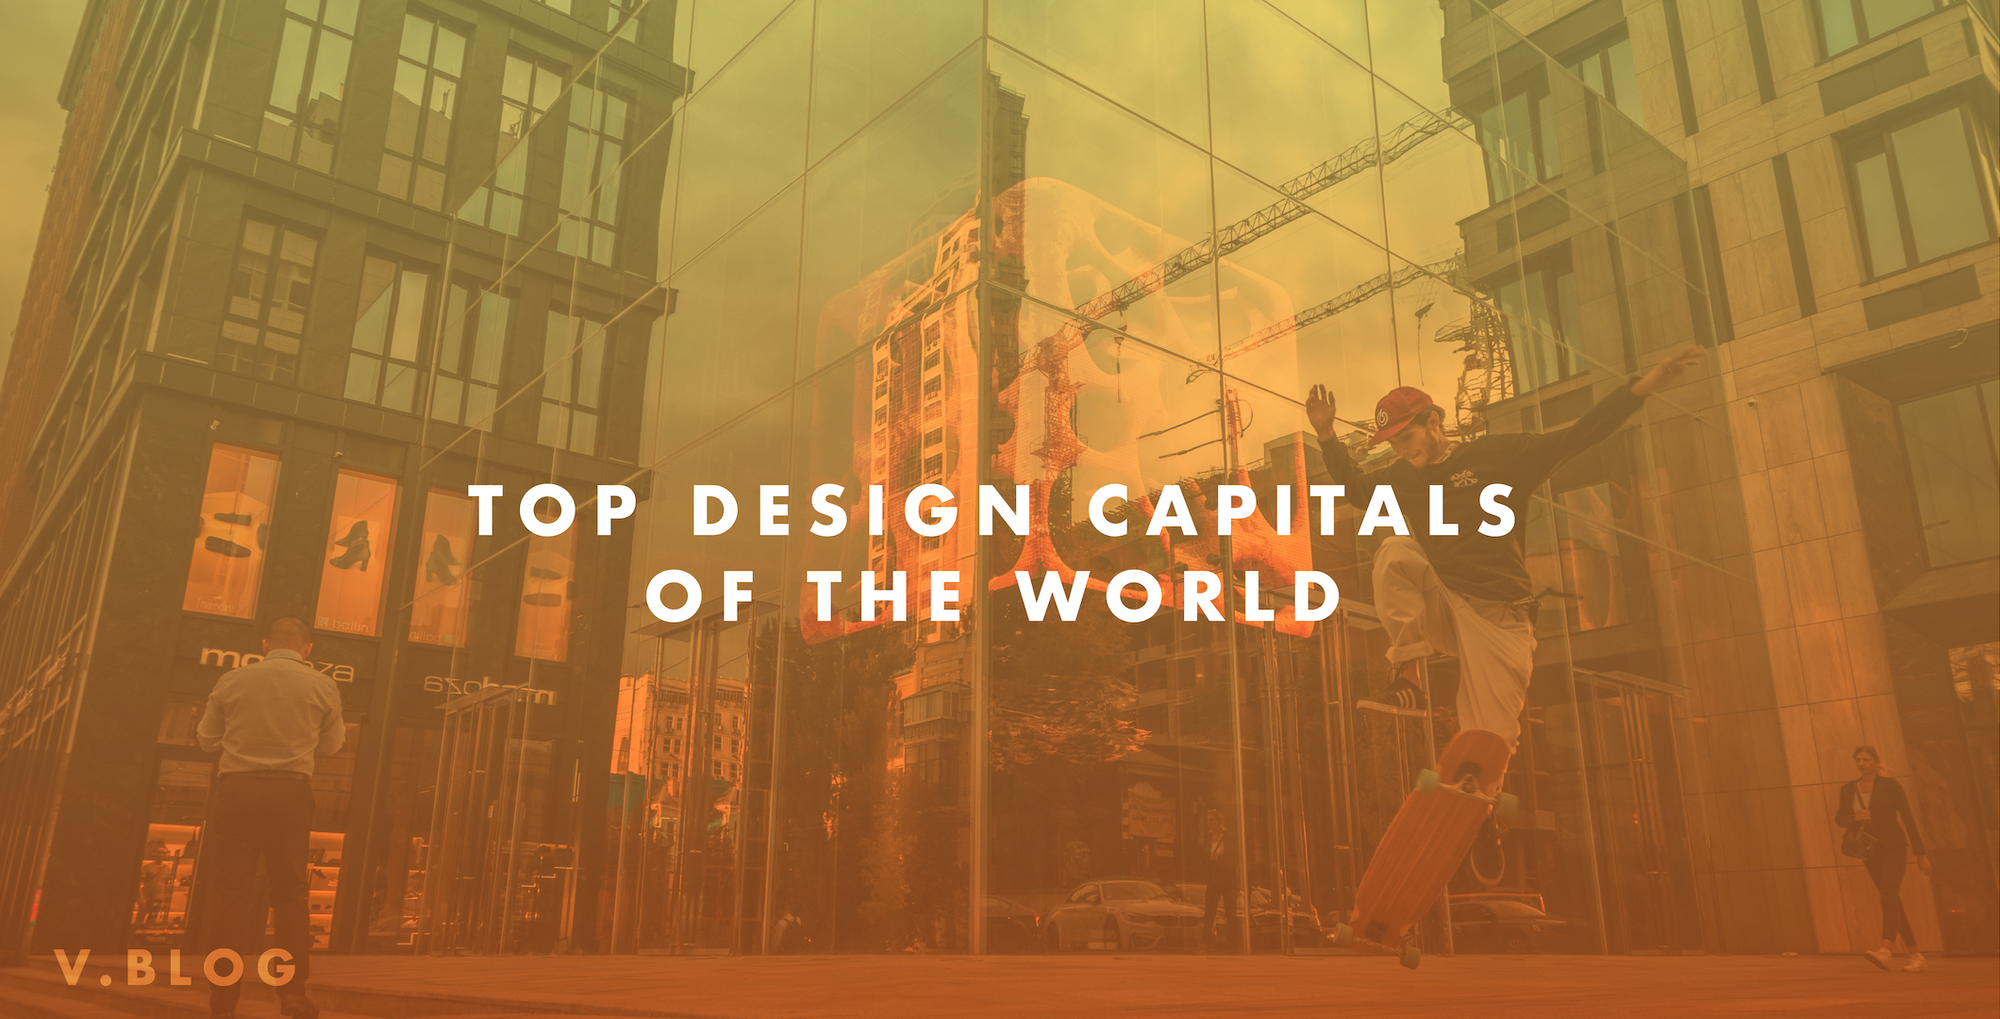 Top Design Capitals of the World